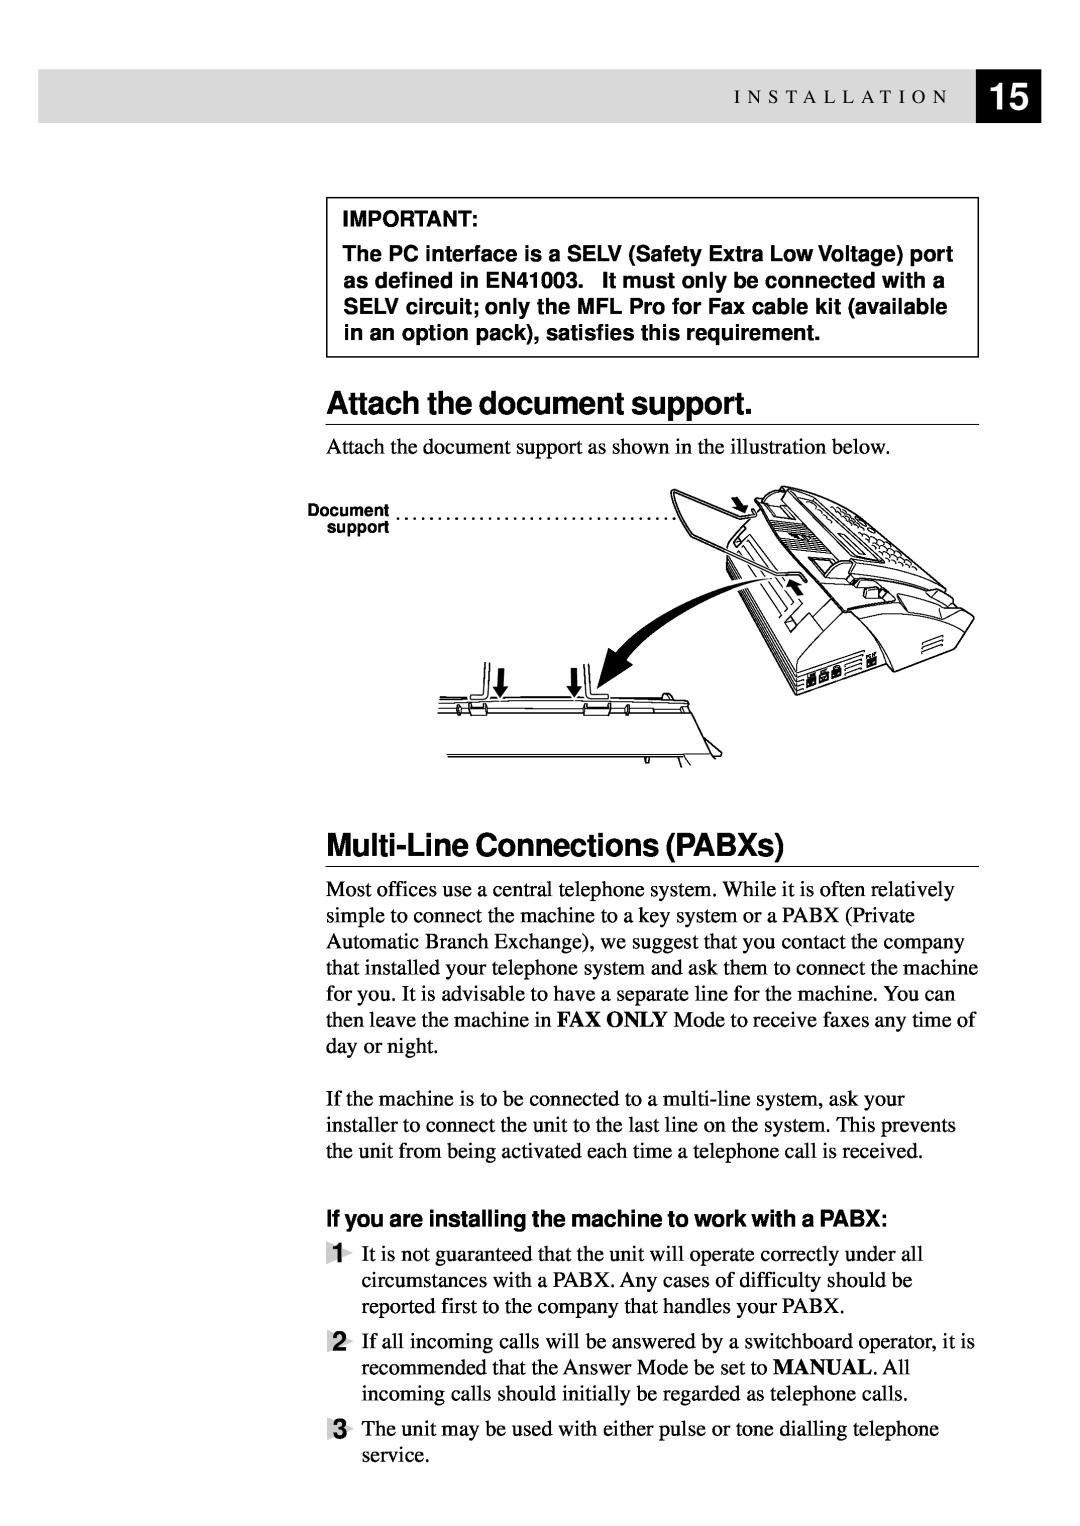 Brother 515 manual Attach the document support, Multi-Line Connections PABXs 